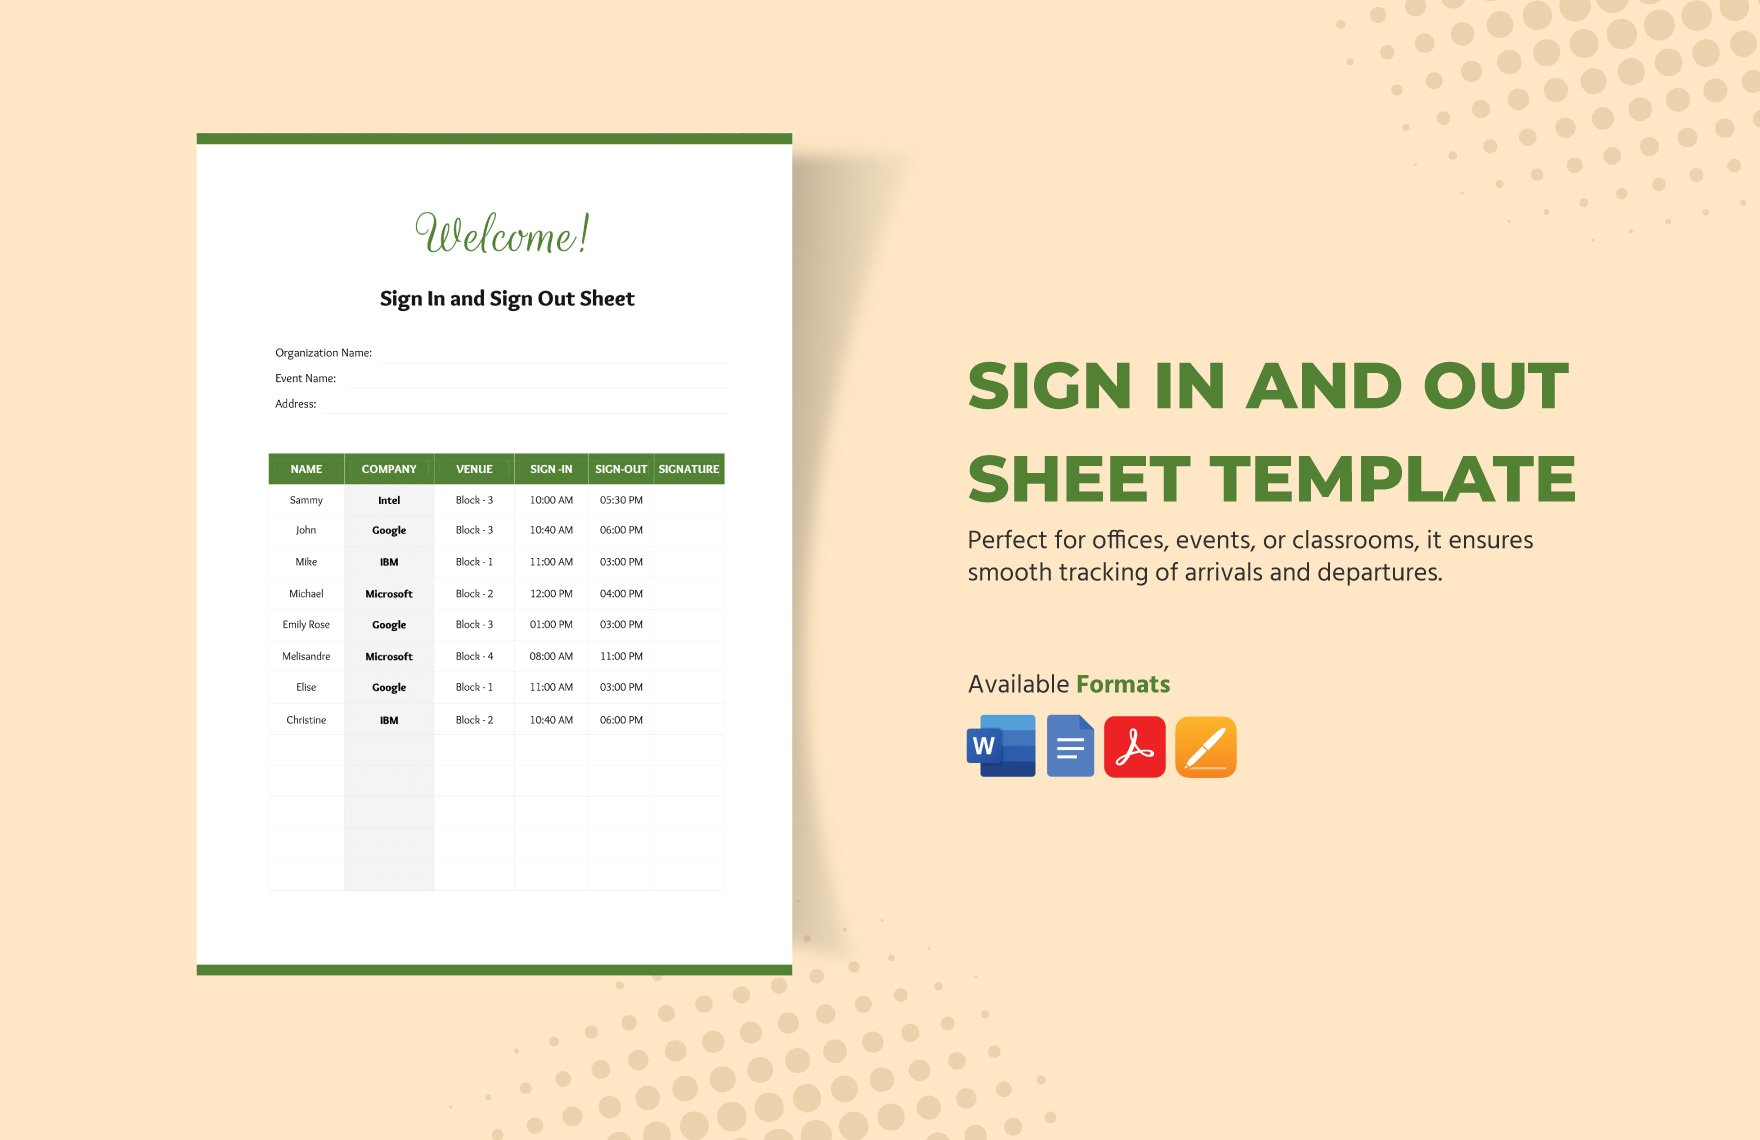 Sign In and Out Sheet Template